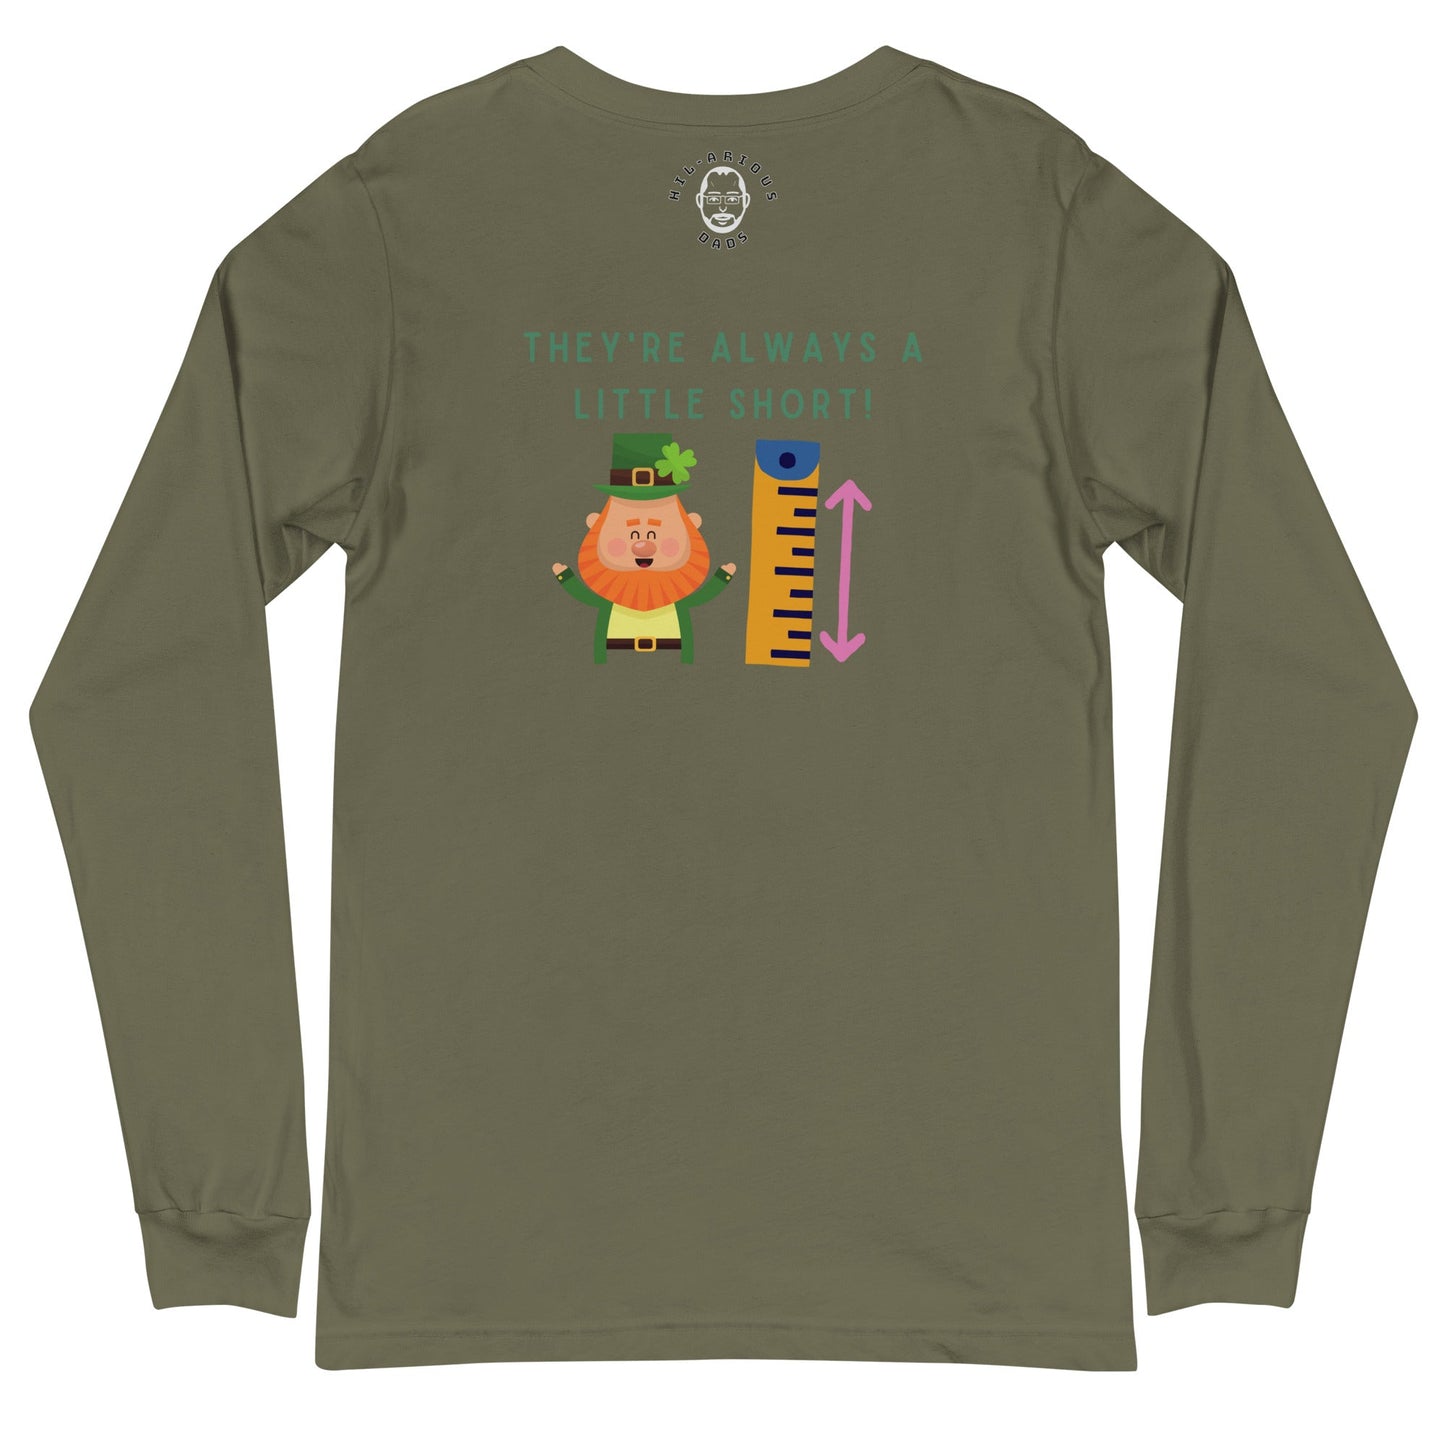 Why can't you borrow money from a leprechaun?-Long Sleeve Tee - Hil-arious Dads